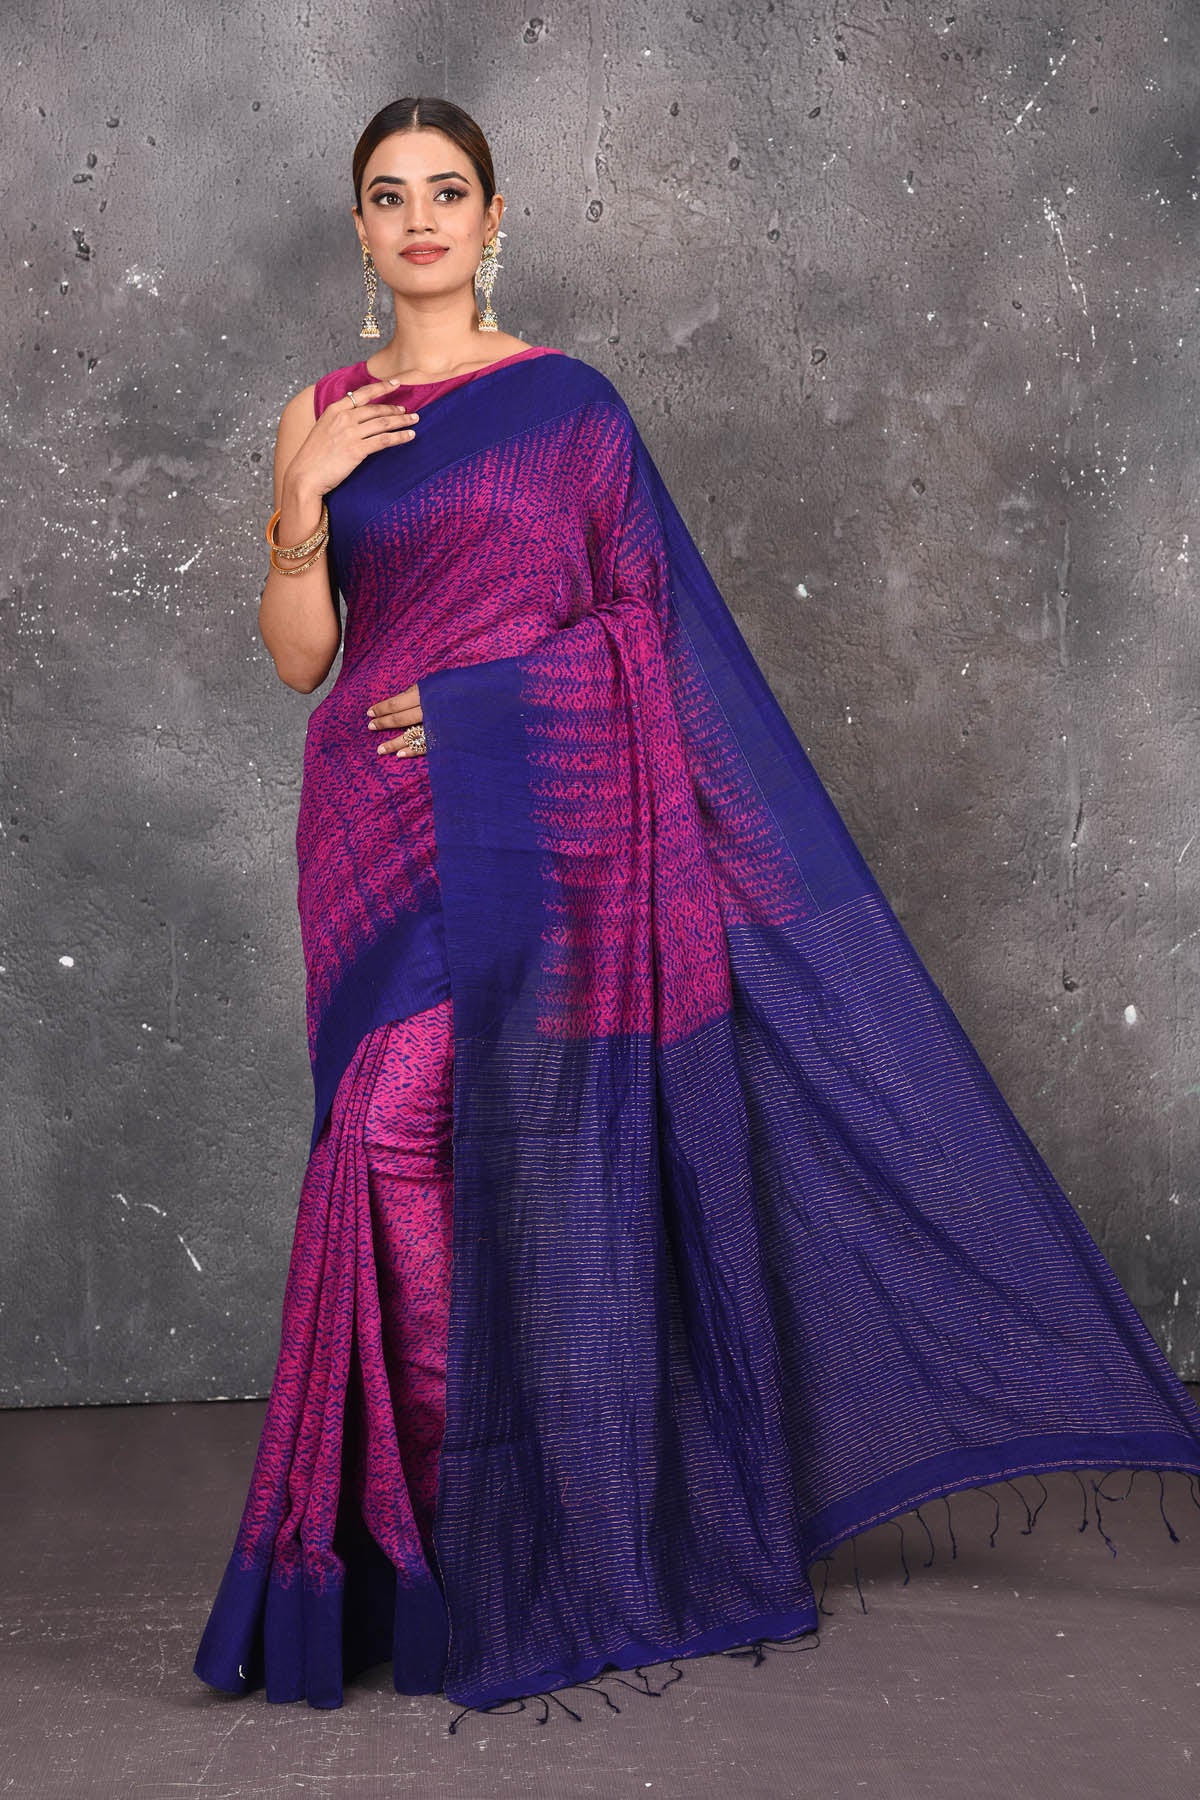 Shop this elegant blue-pink handloom shibori tussar saree online in USA which is handcrafted from fine silk tussar fabric, this tie and dye saree brings out the nature of flow. You can pair this beautiful shibori print with minimal jewellery for a casual day outfit. Add this plain shibori saree to your collection from Pure Elegance Indian fashion store in USA.- Full view with open pallu.